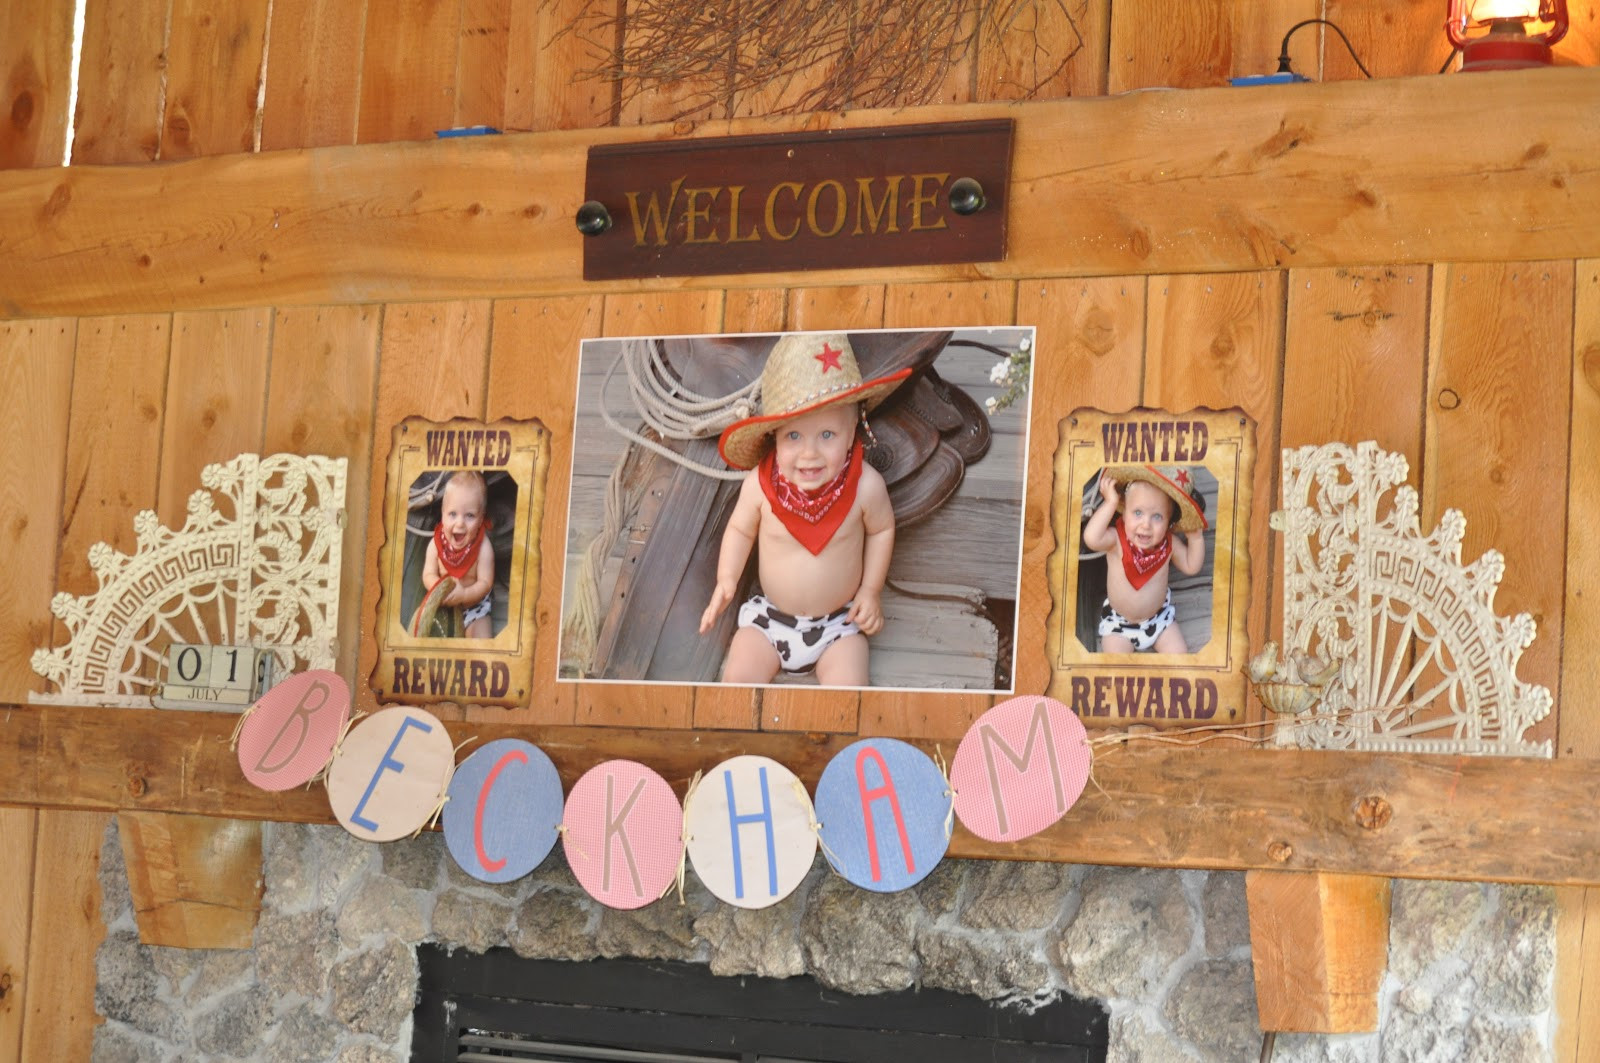 Cowboy Birthday Party Supplies
 Cowboy Birthday Party Ideas events to CELEBRATE